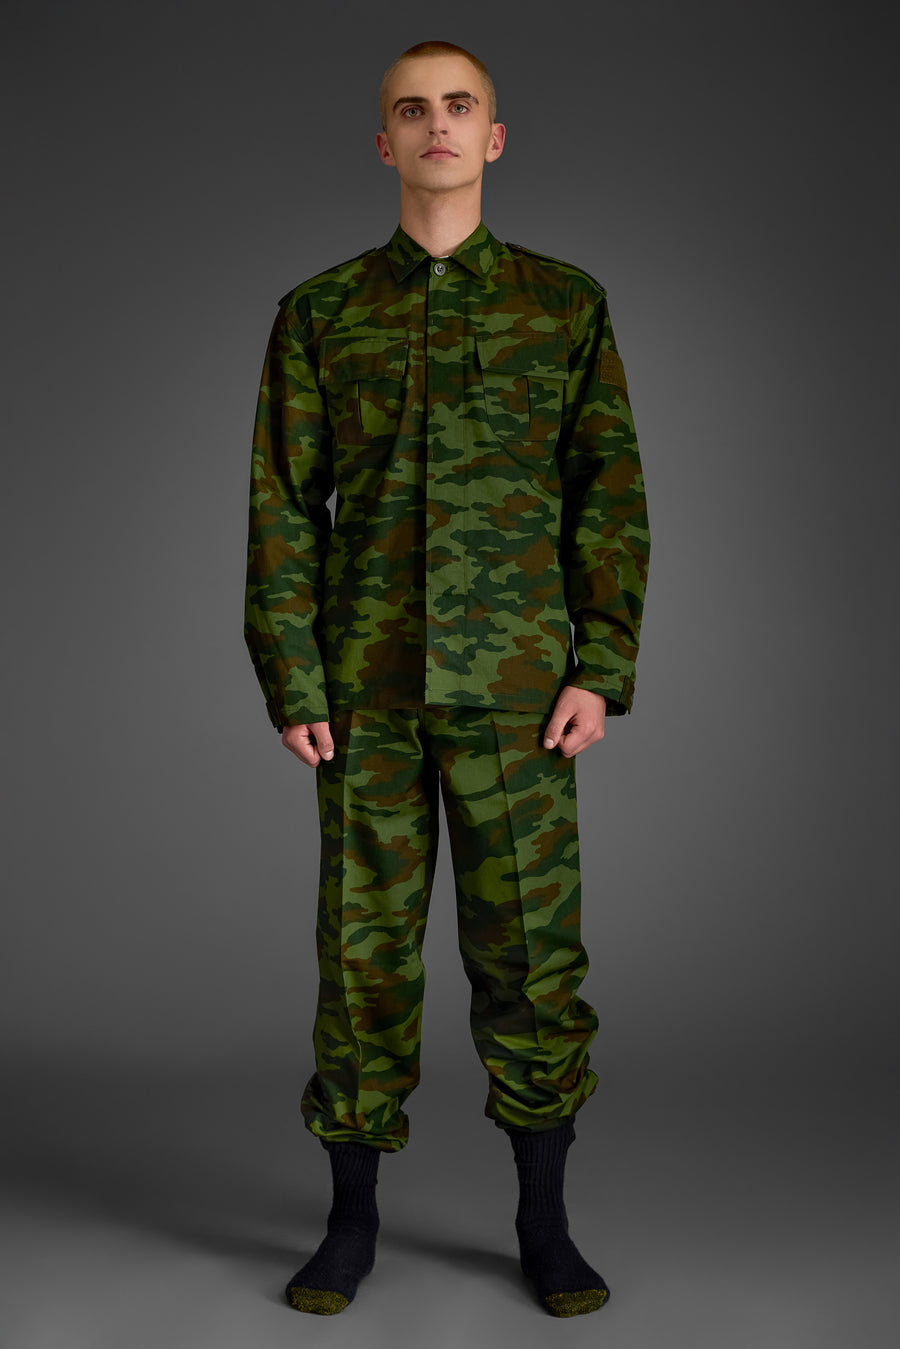 Green Camouflage BDU designed for land forces